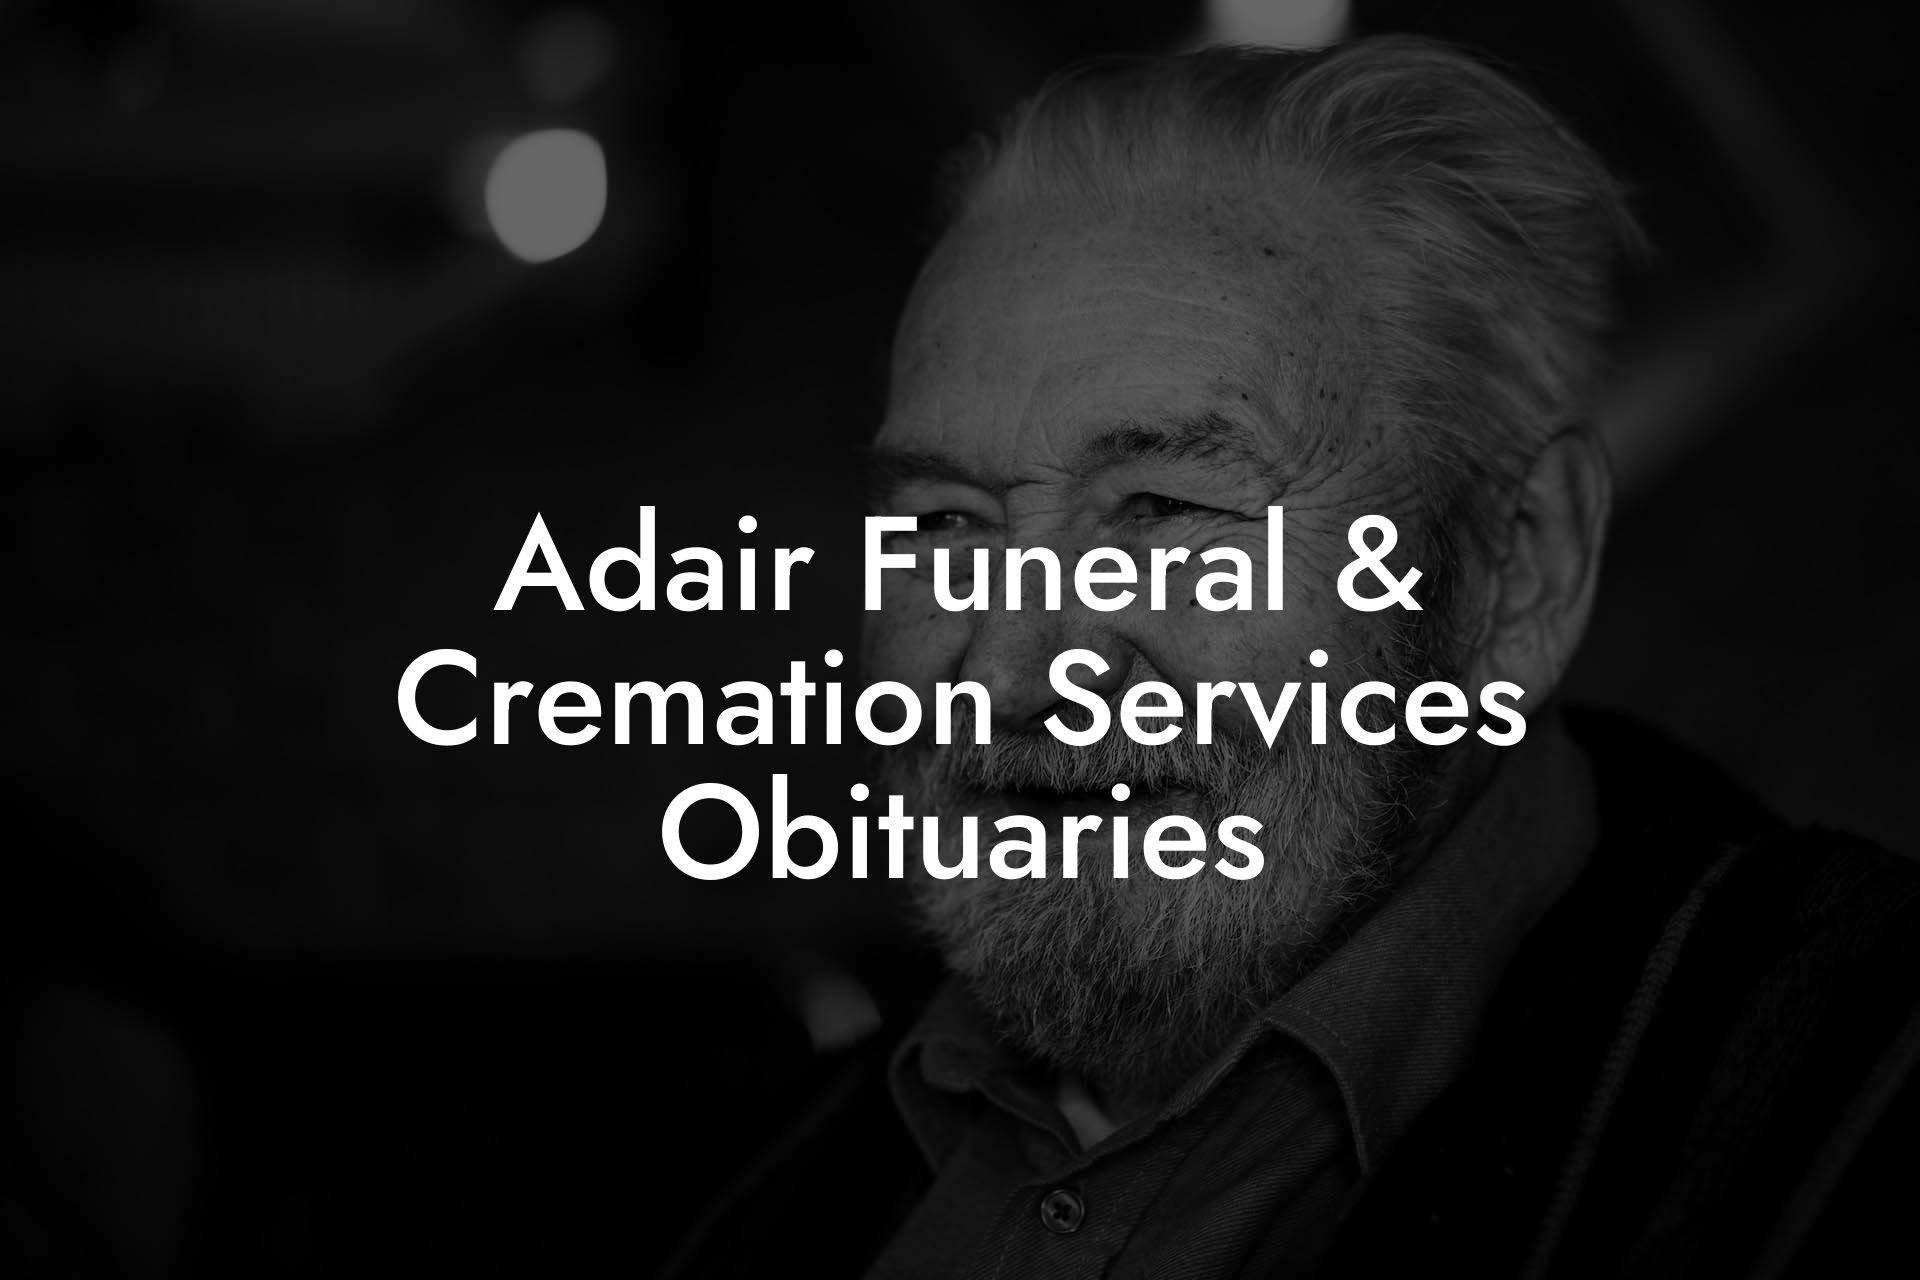 Adair Funeral & Cremation Services Obituaries